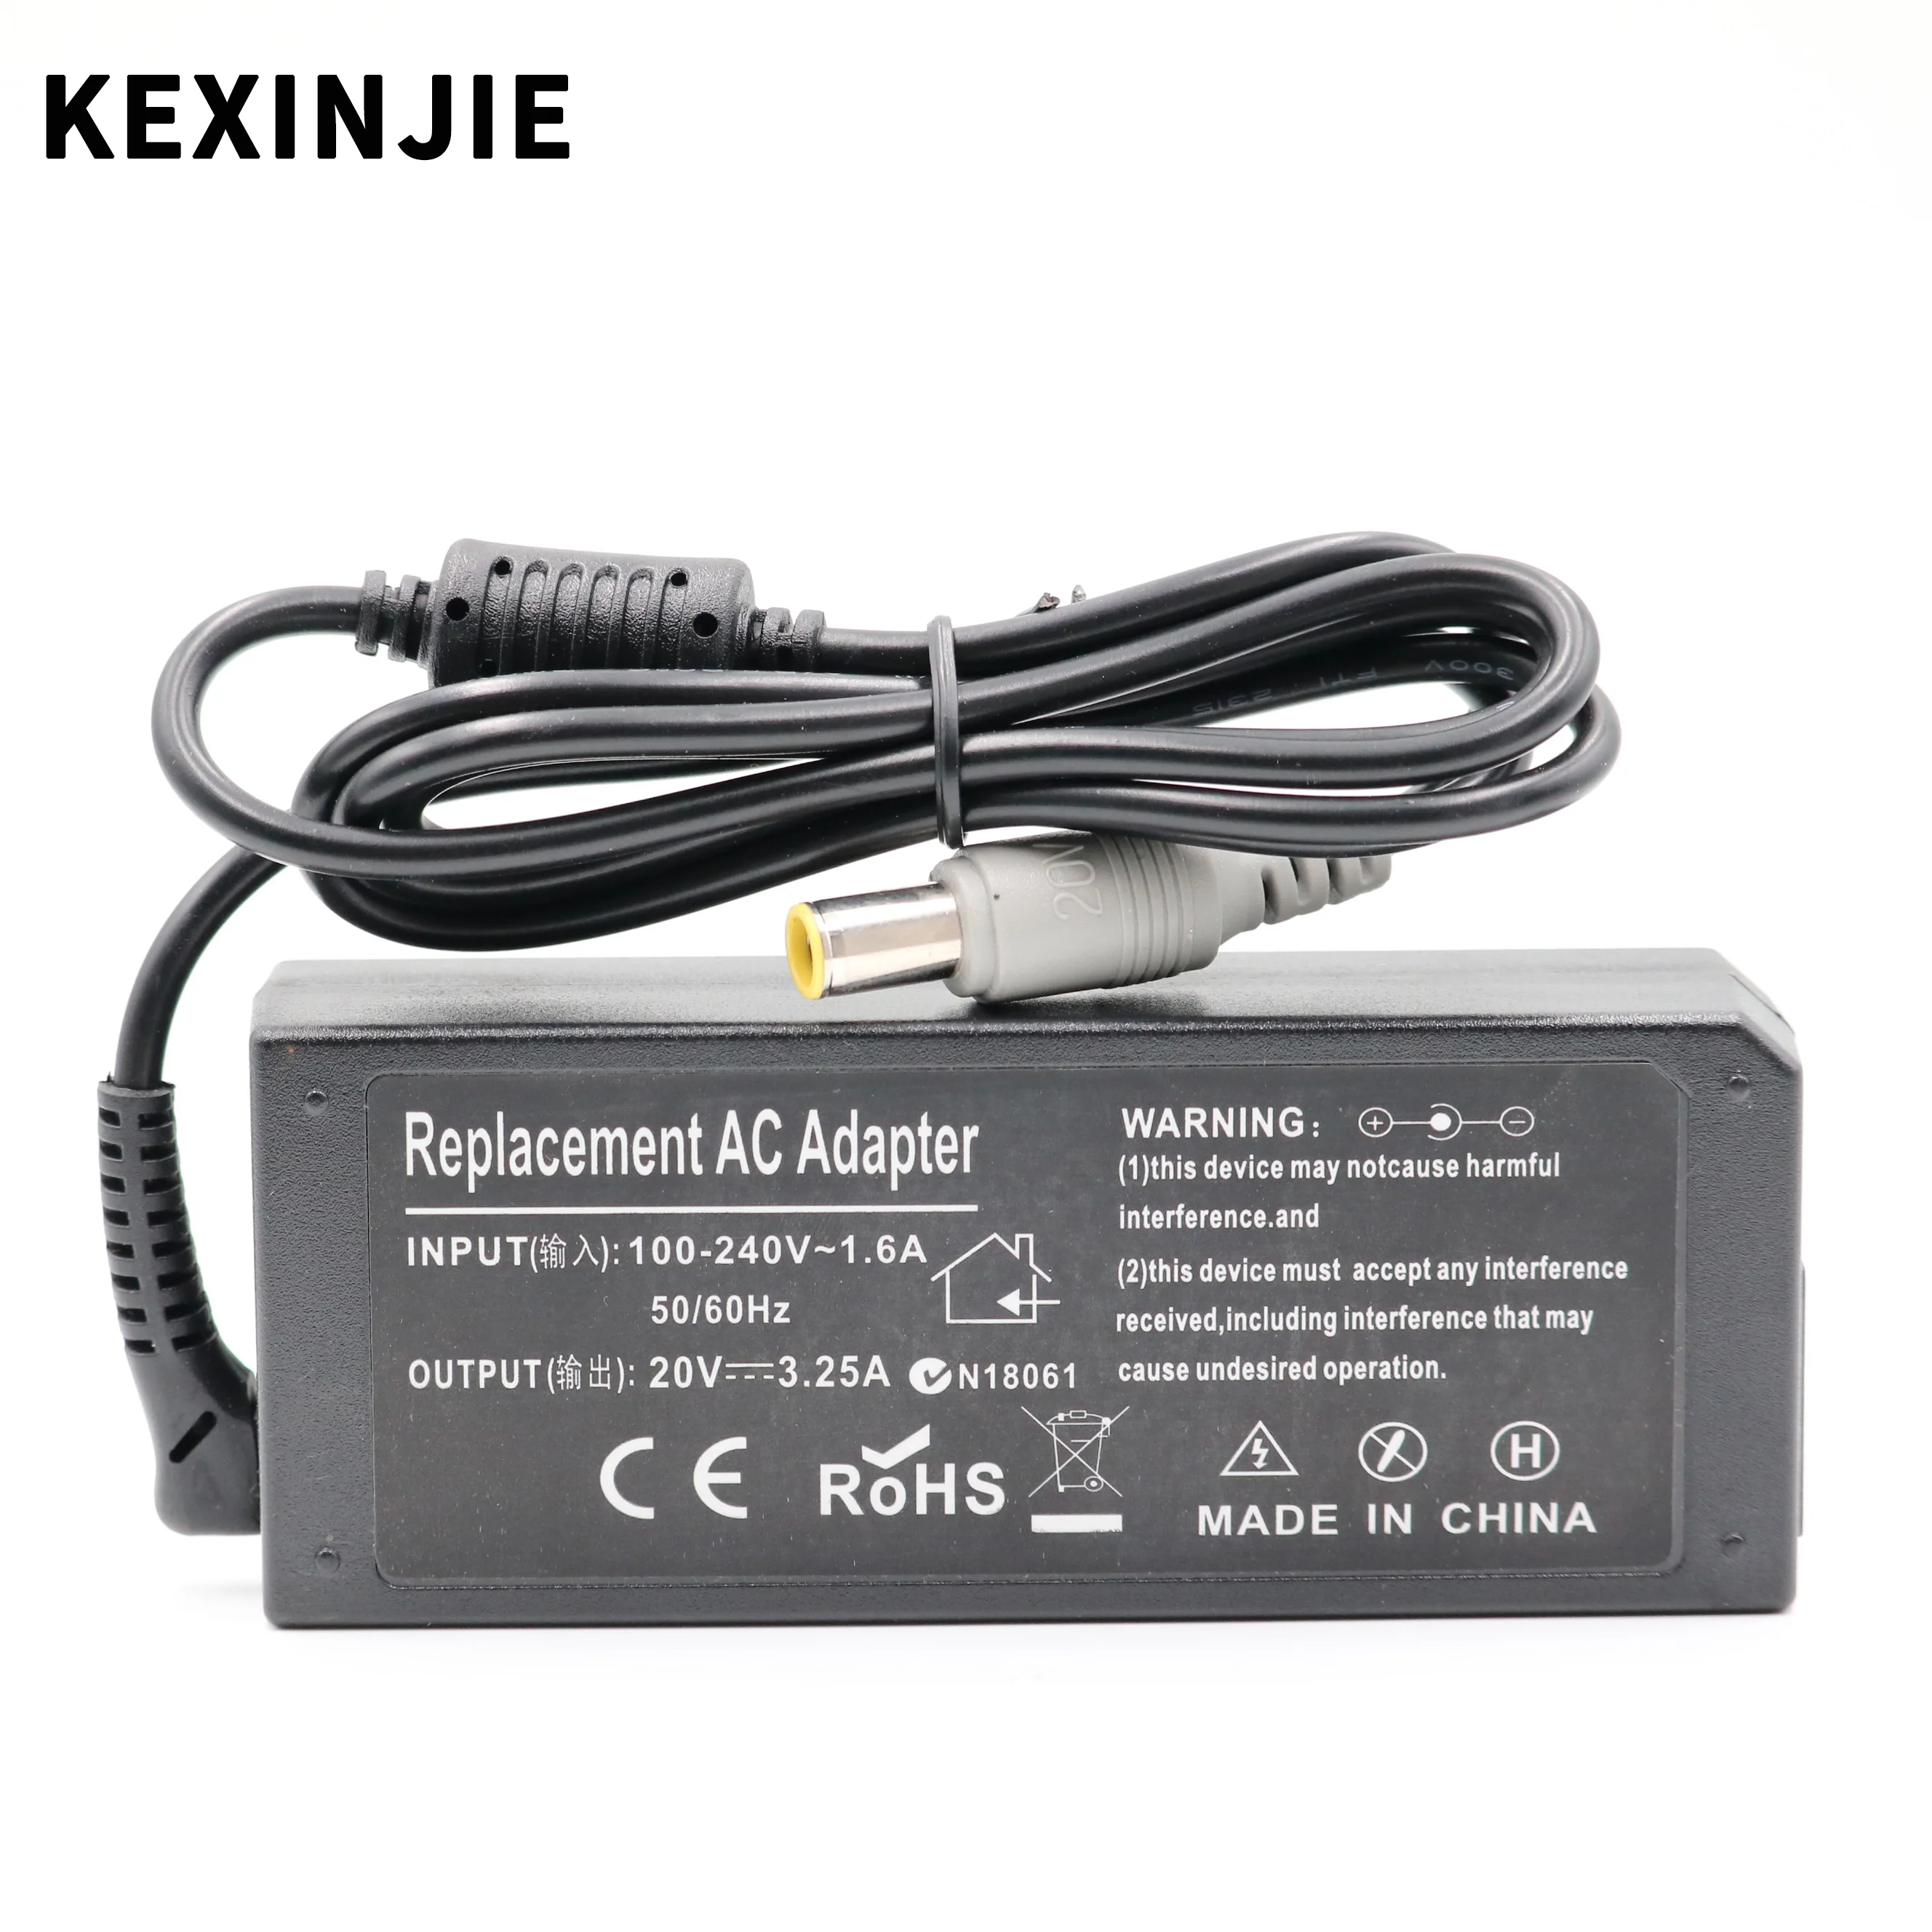 

65W 20V 3.25A 7.9*5.5mm AC Adapter Power Supply for IBM (Lenovo) X200 X300 R400 R500 T410 T410S T510 SL510 L410 L420 Charger